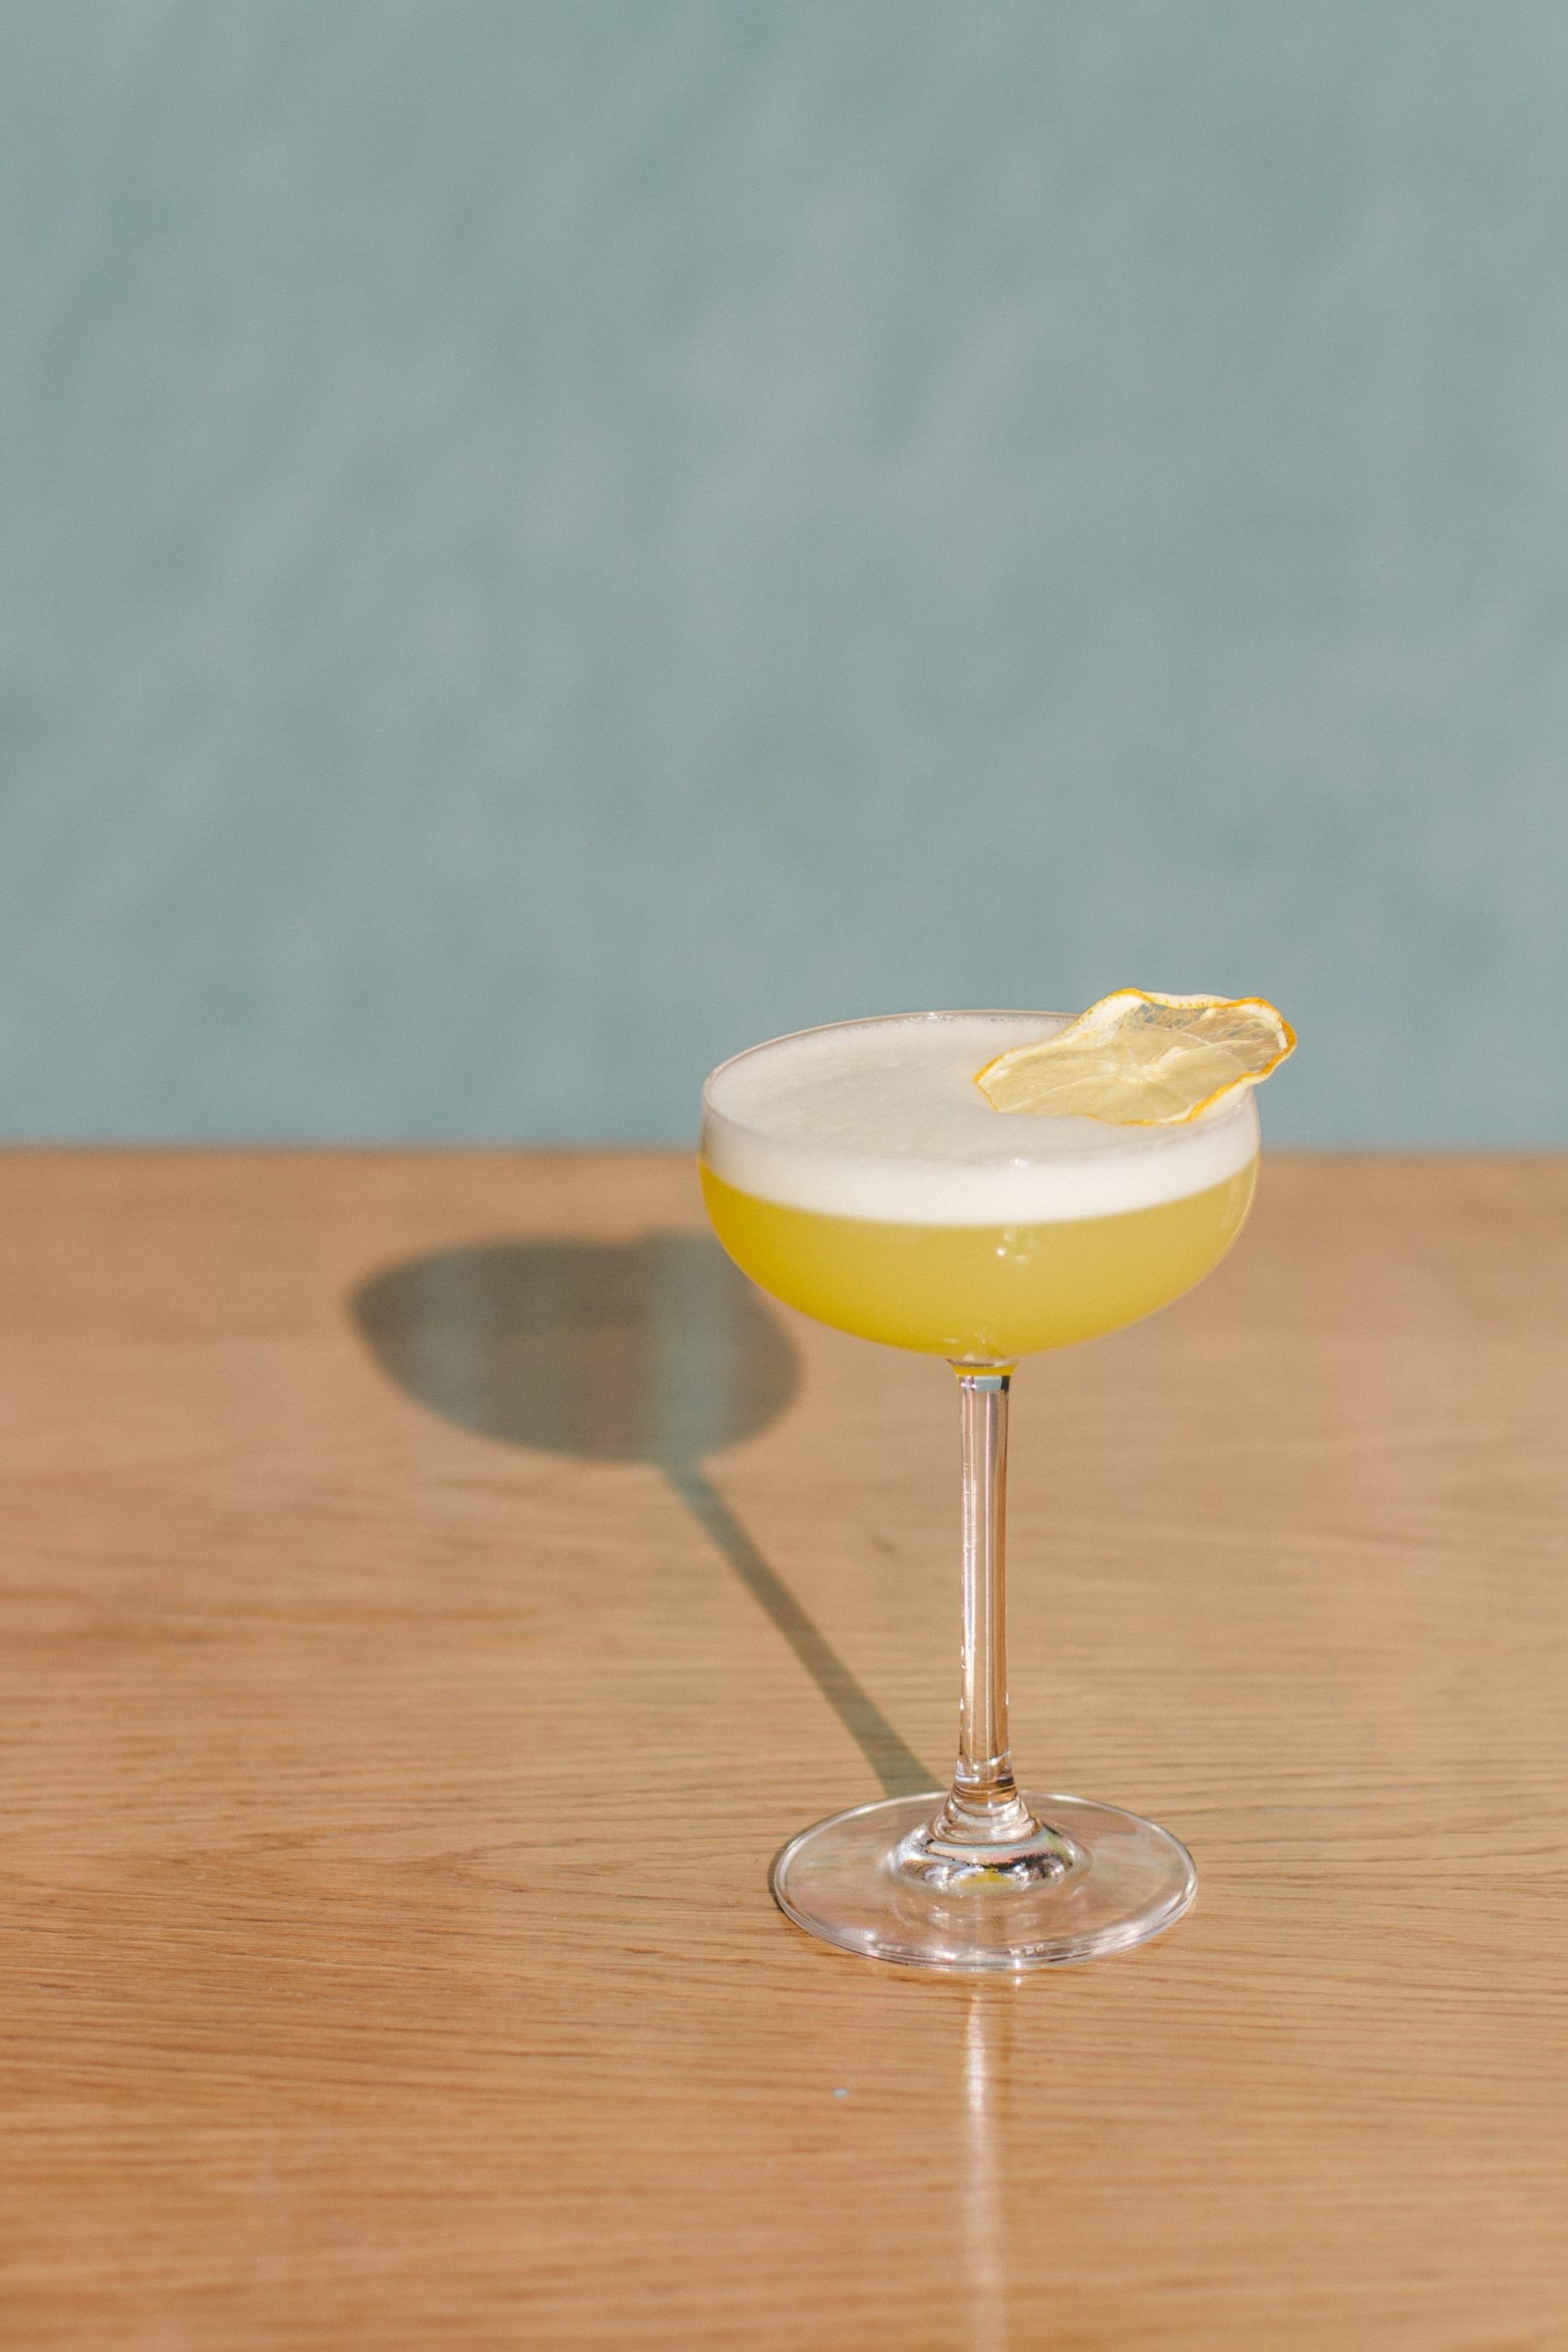 A yellow cocktail made with Yellow Chartreuse with a dried lemon garnish on a wooden table